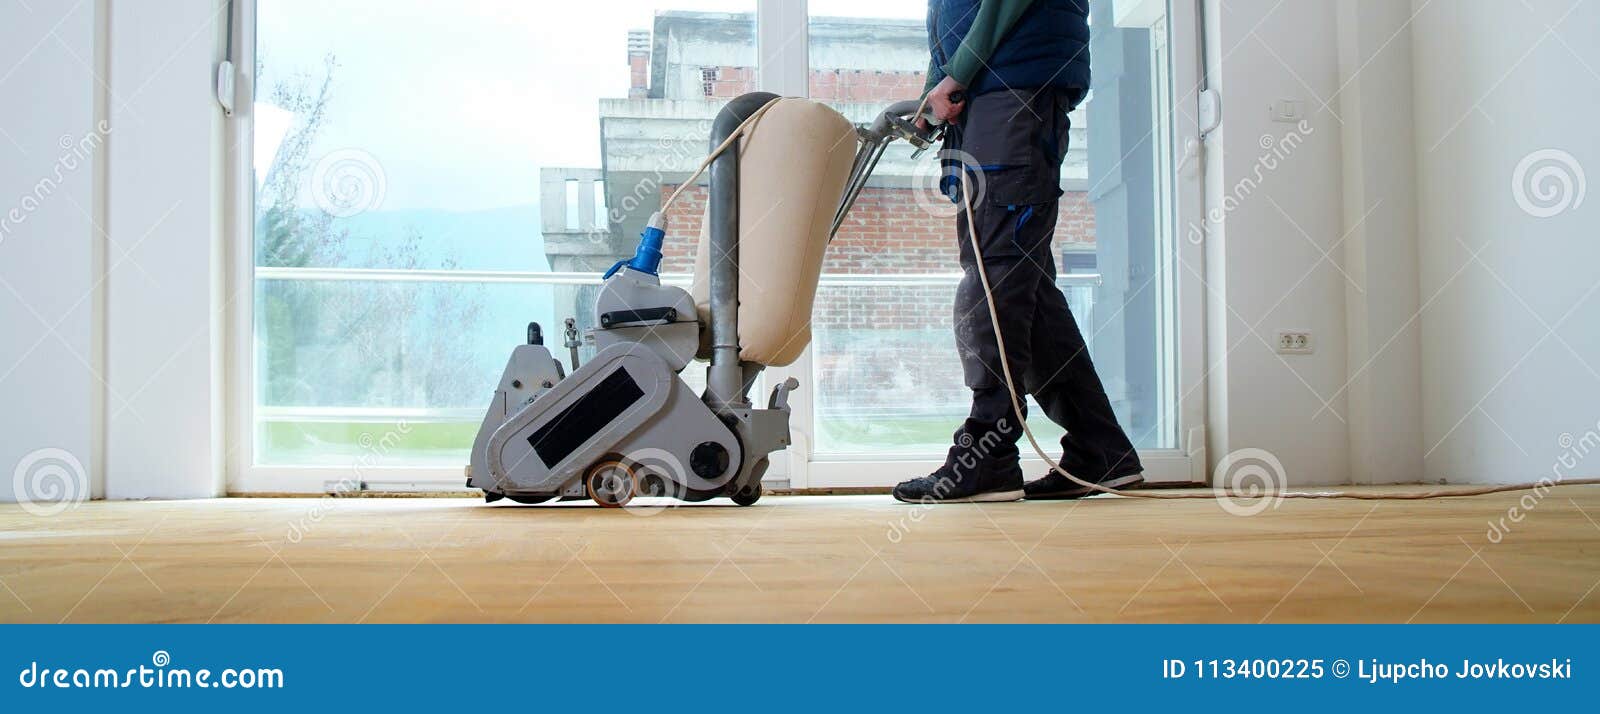 sanding parquet with the grinding machine